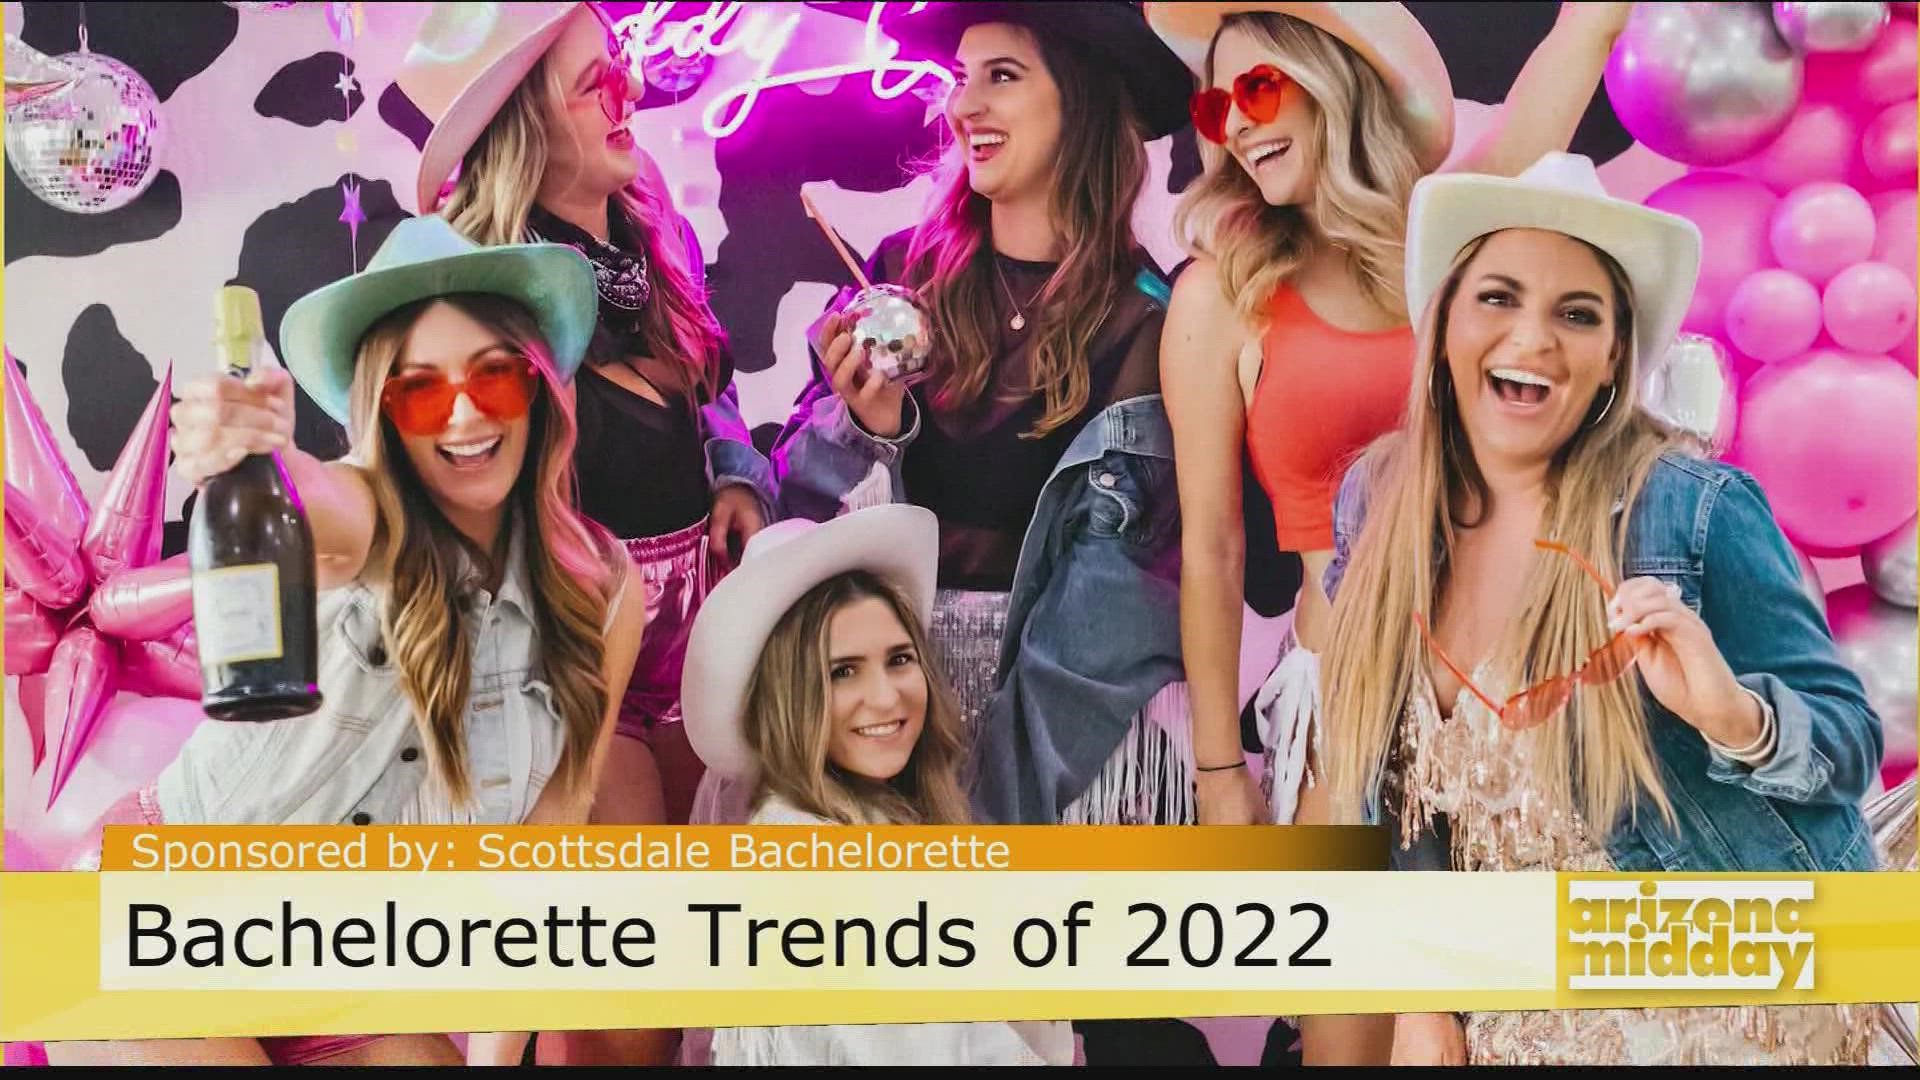 Casey Hohman, Owner of Scottsdale Bachelorette, shares the top trends for this coming year and it's all about Disco plus how he can help plan the perfect weekend in